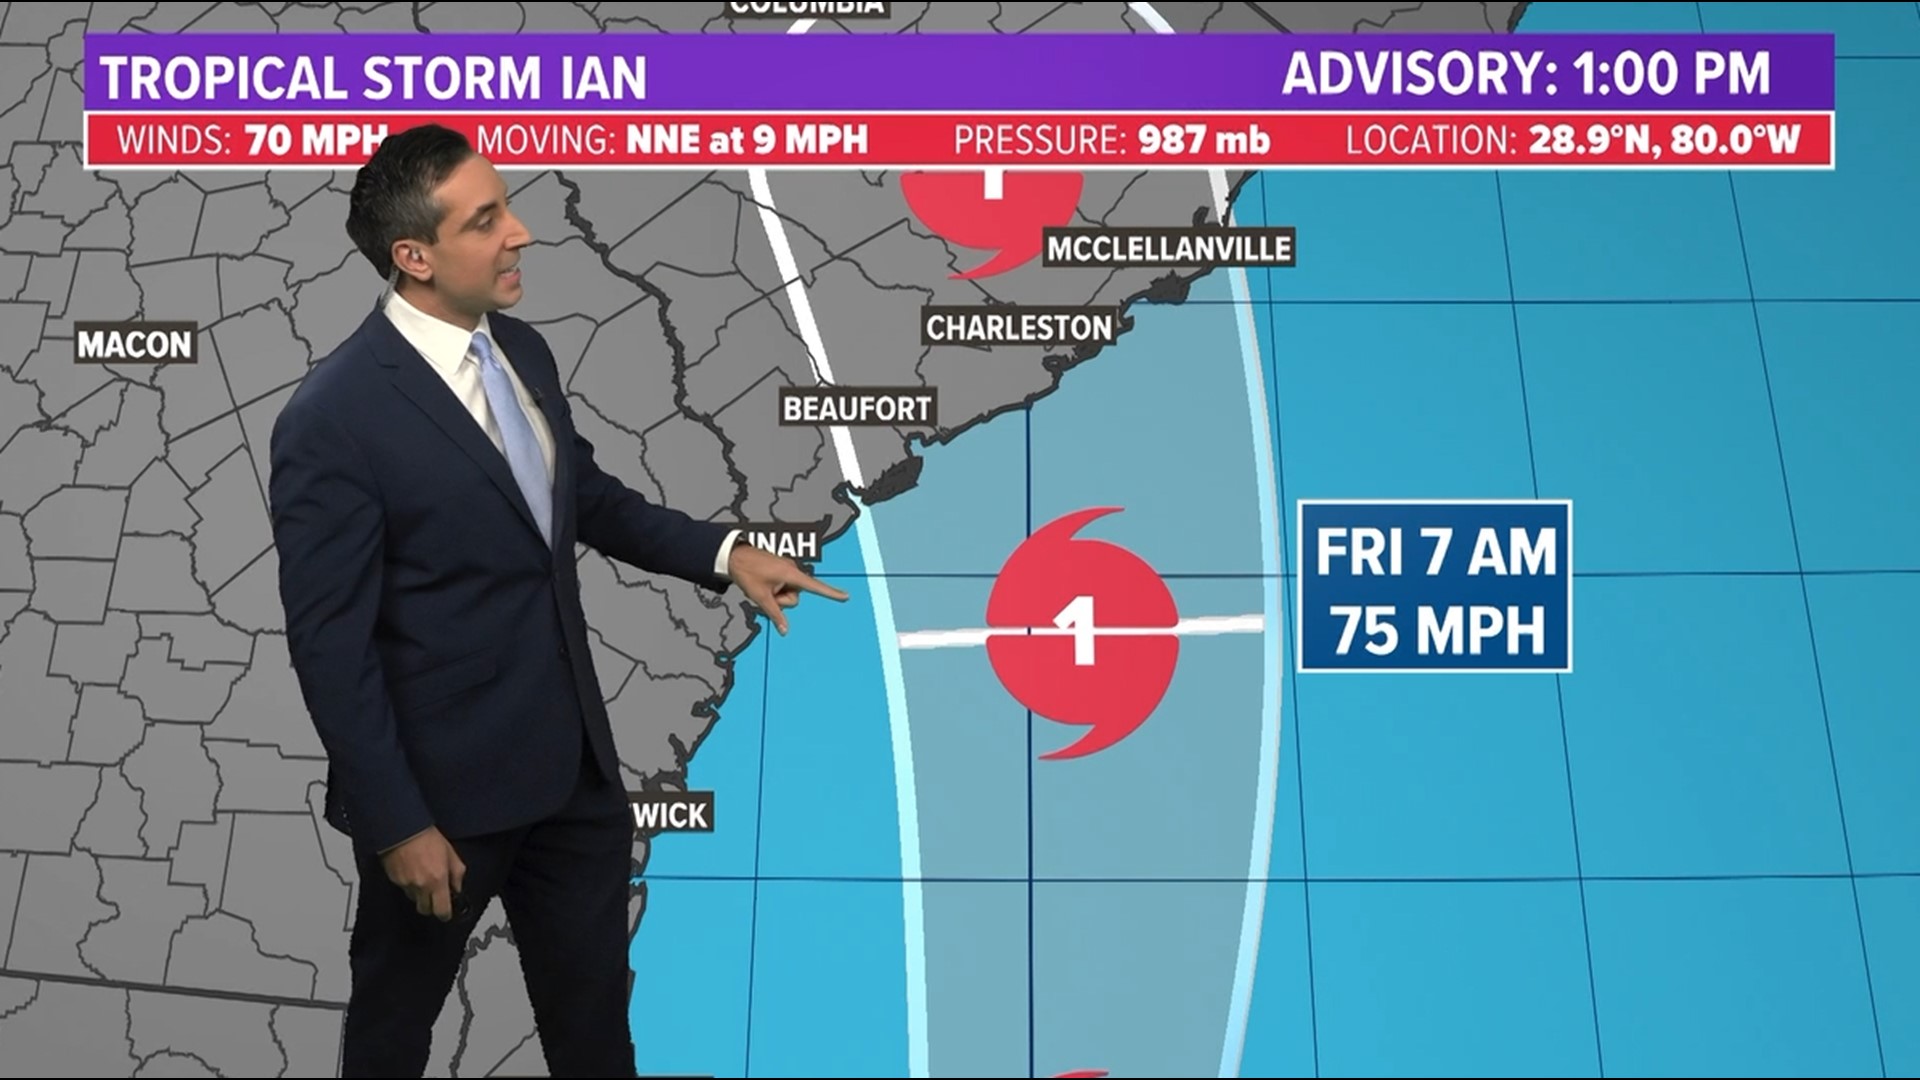 Ian has pushed offshore and is moving over warm waters. It will likely regain hurricane status as it makes its secondary U.S. landfall along the South Carolina coast